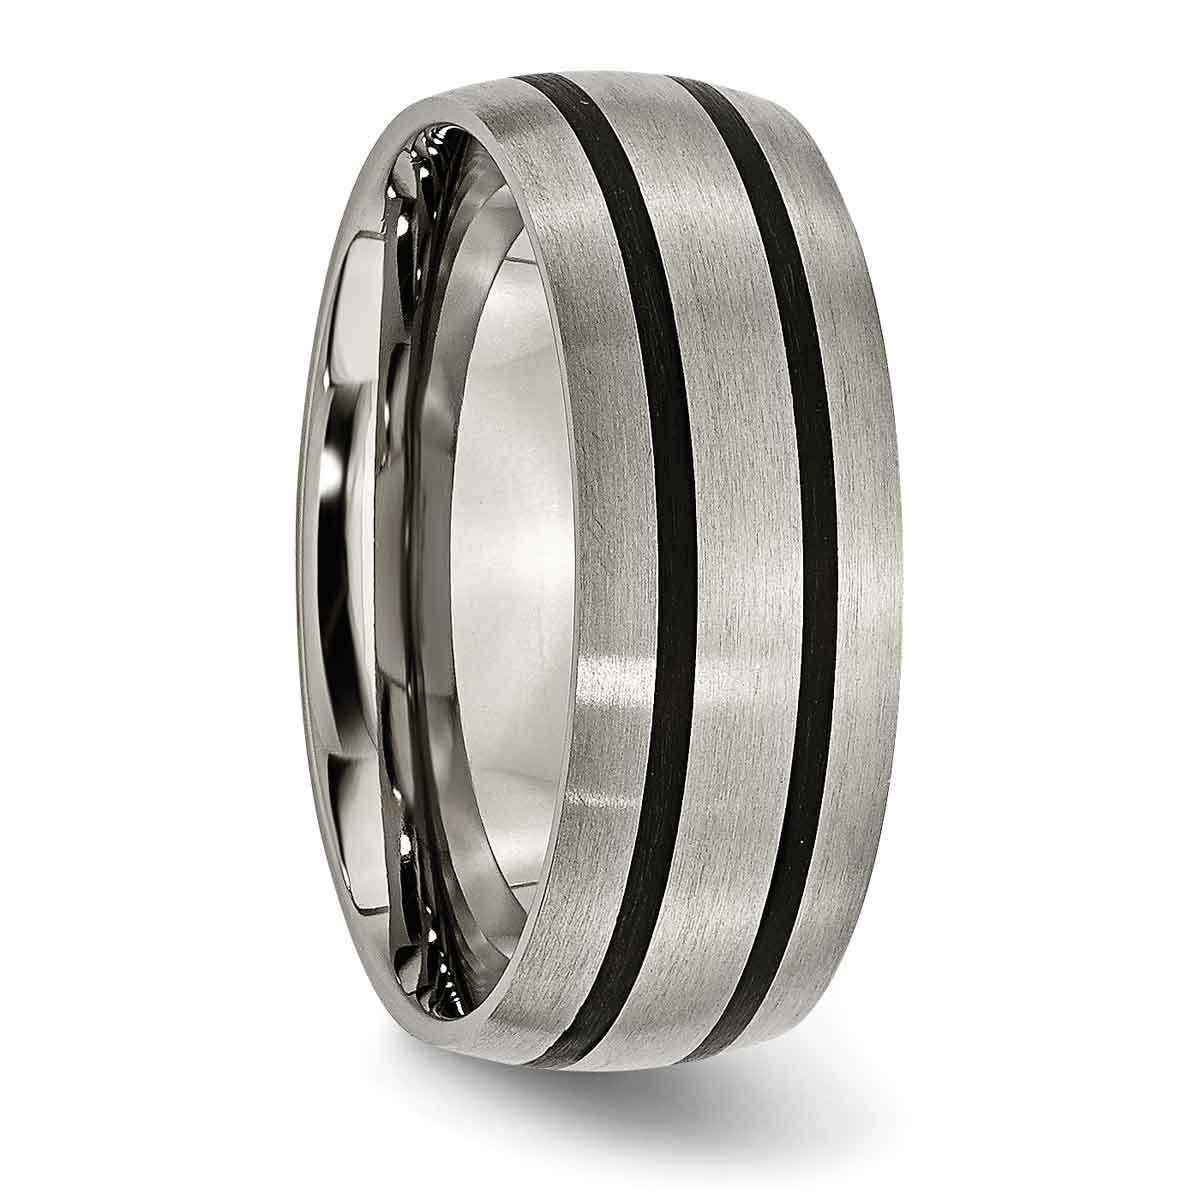 Best Quality Free Gift Box Satisfaction Guaranteed Titanium Enameled Grooved 8mm Satin Band 